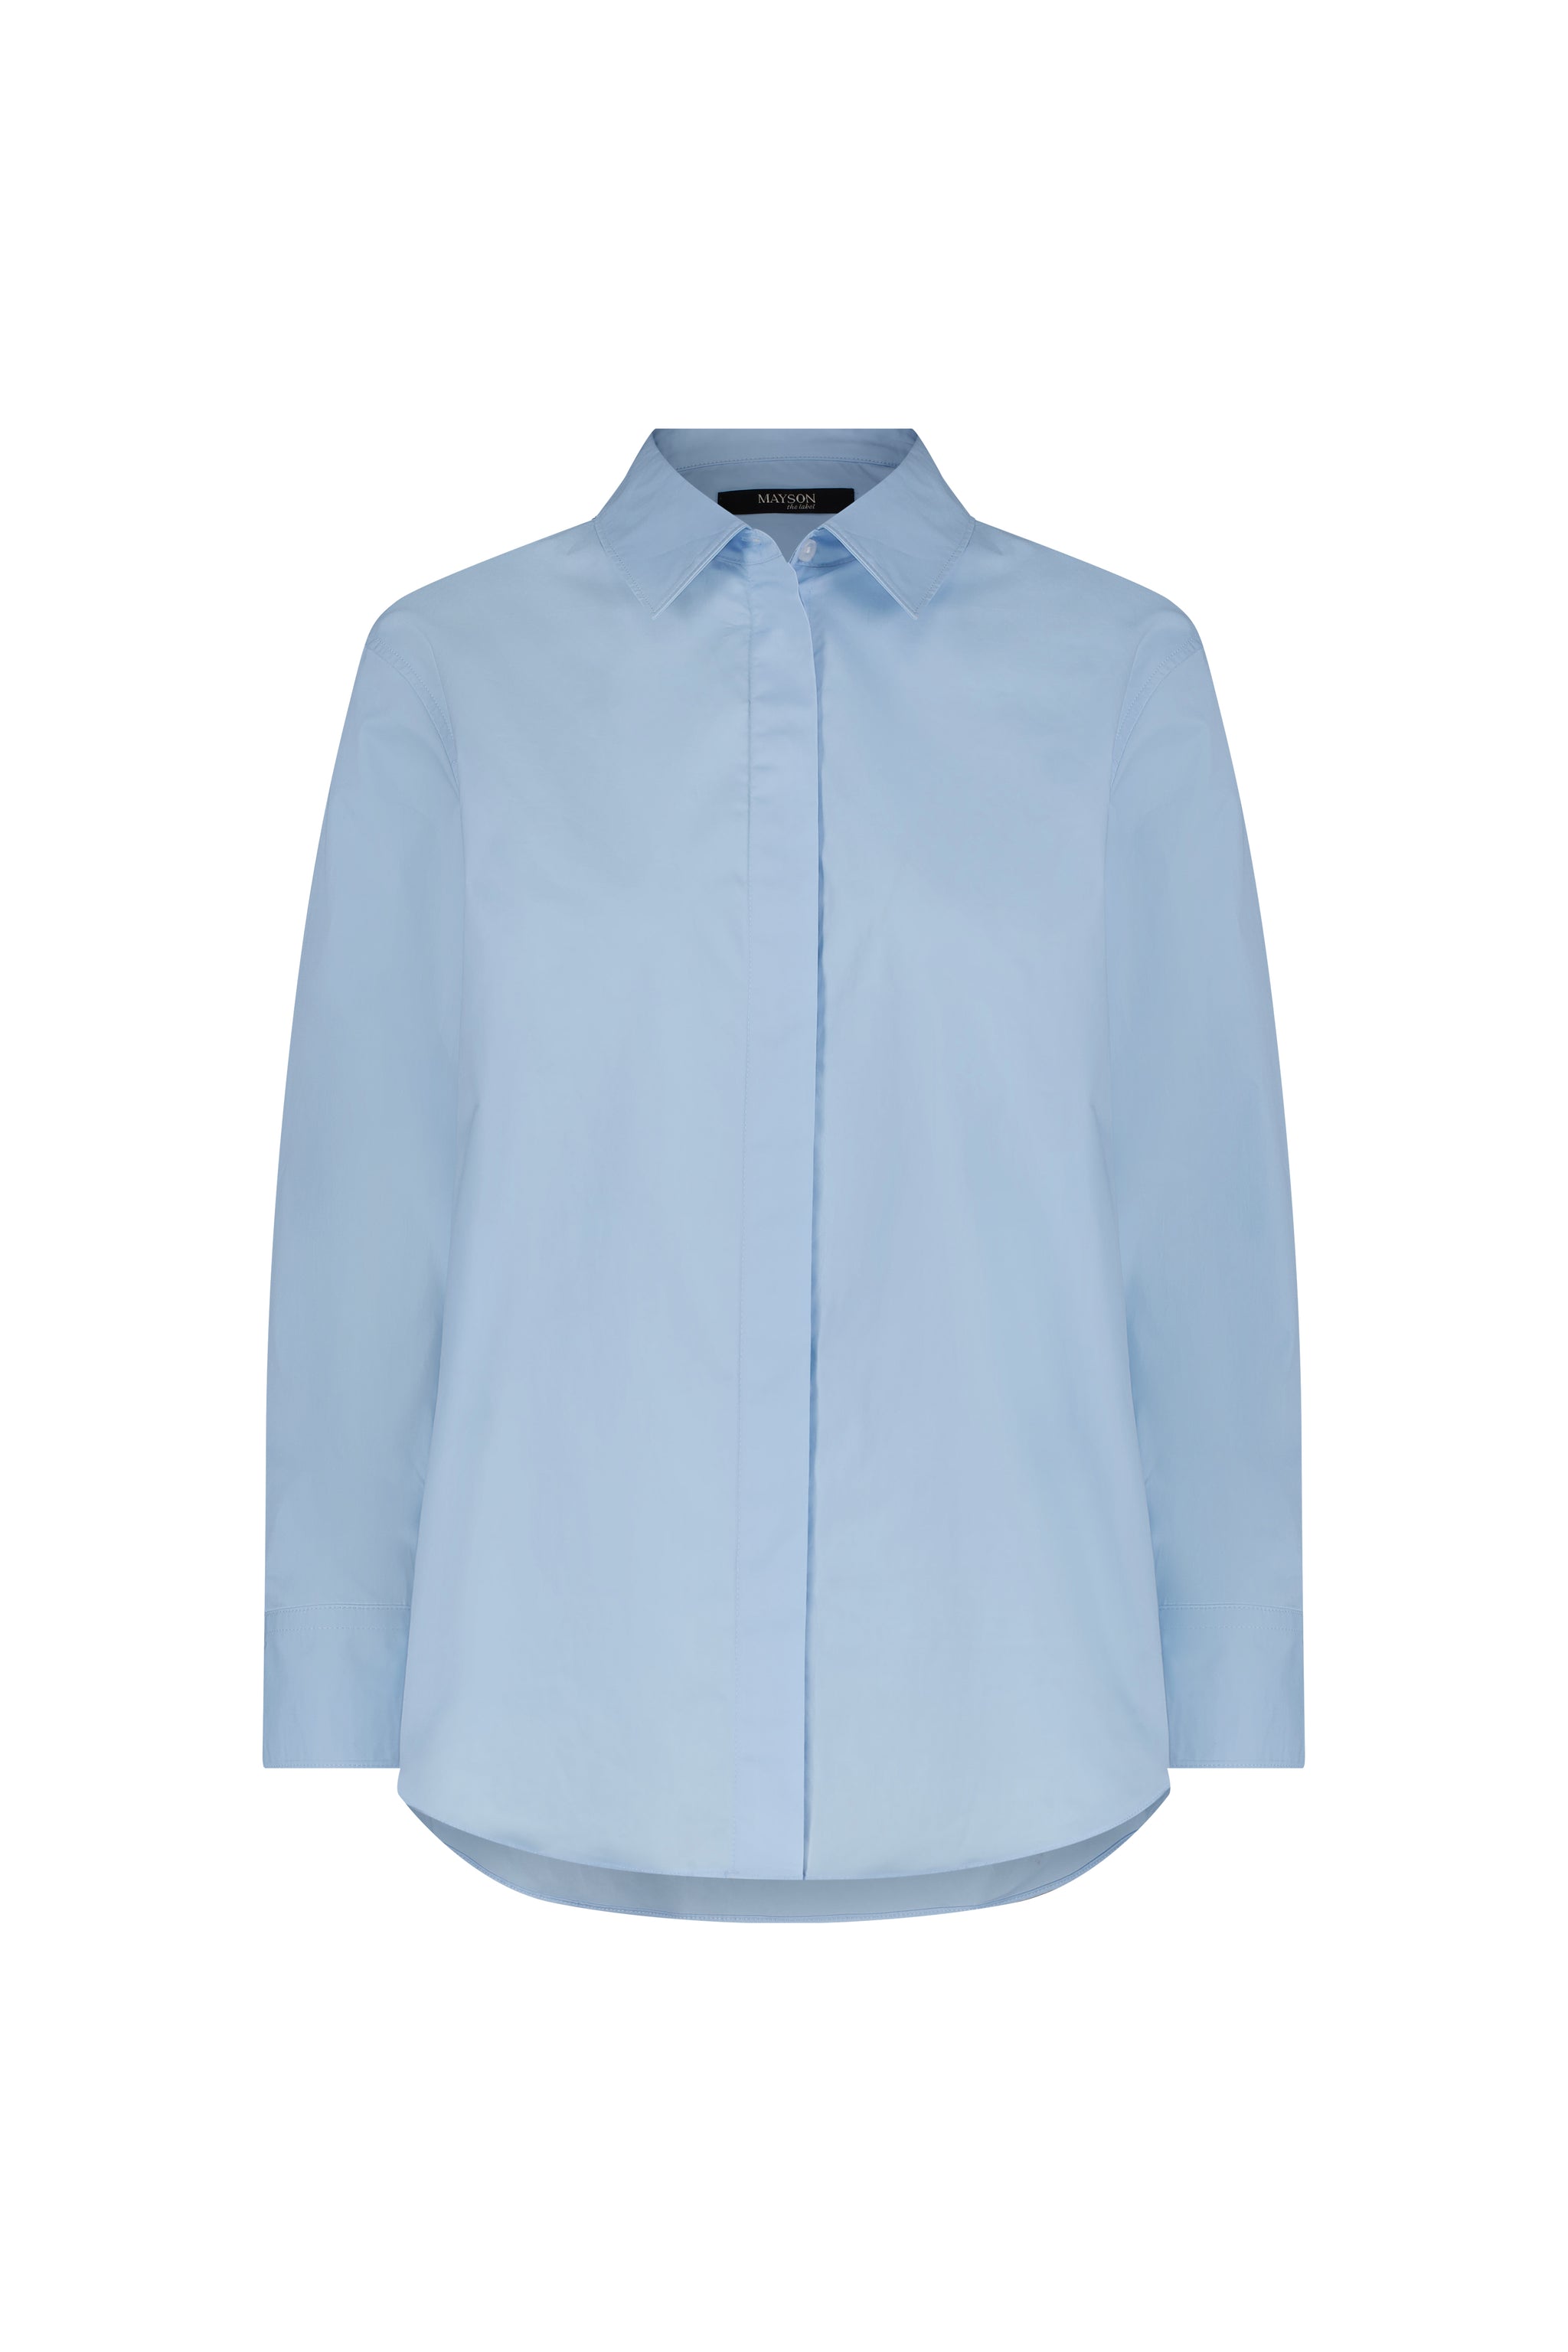 Classic Button Up Shirt French Blue